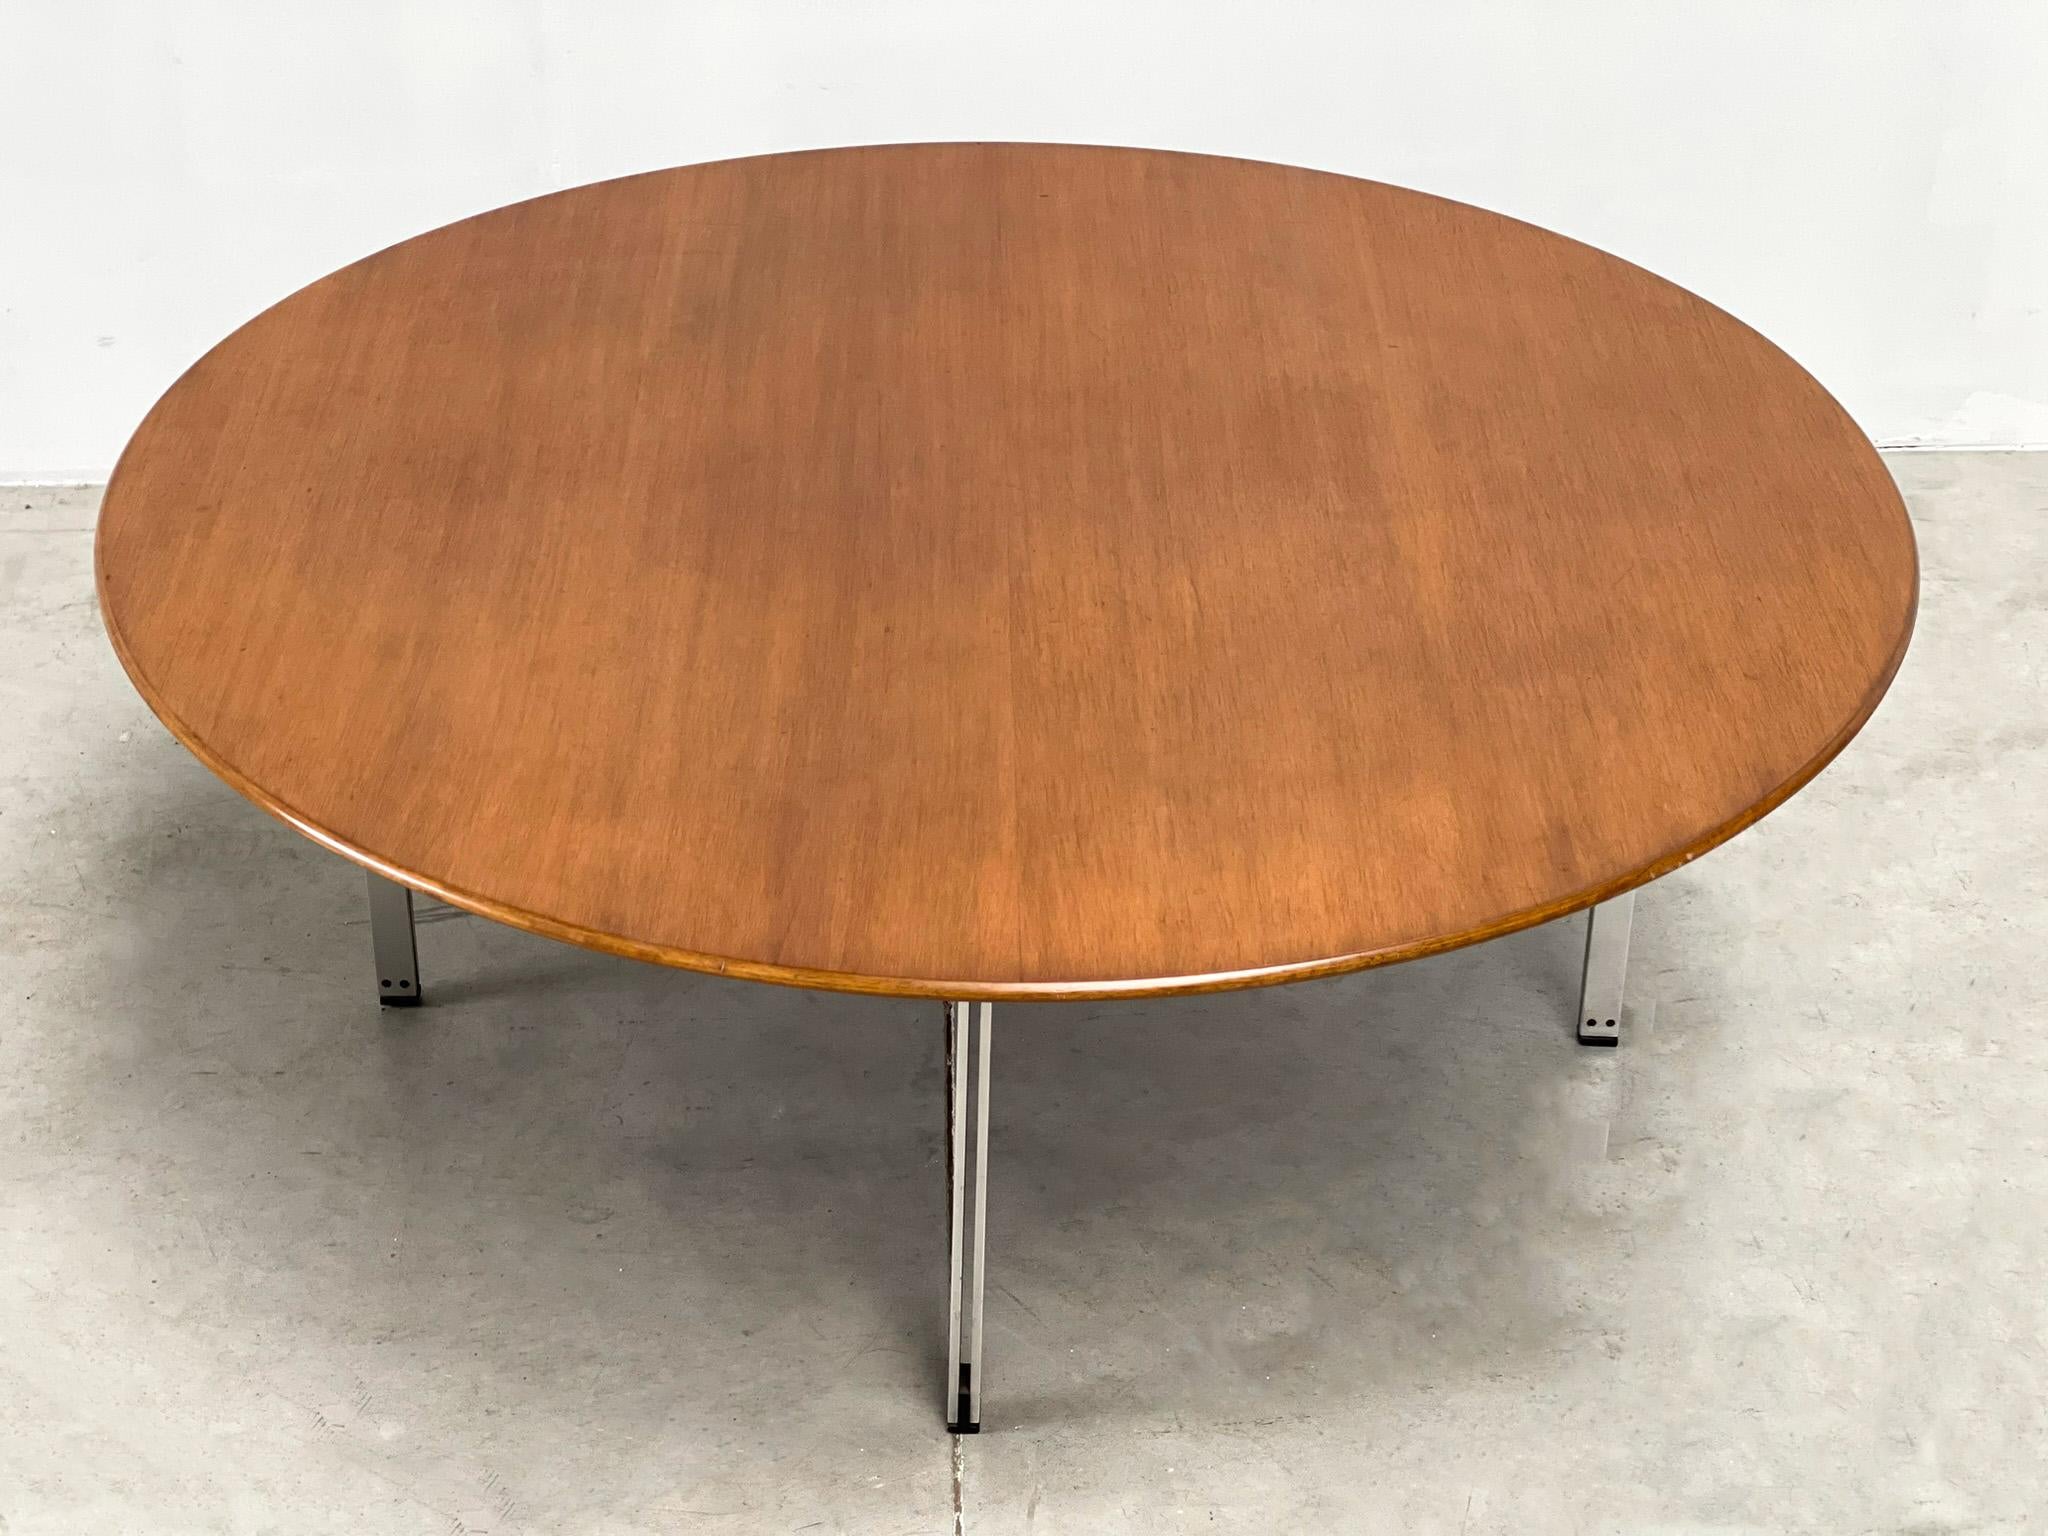 Florence Knoll Parallel coffee table
Very elegant coffee table from 1 of the most famous designers an the last century.

This coffee table was designed by Florence Knoll in the 1960s. It is a very beautiful elegant design. The table is in very nice